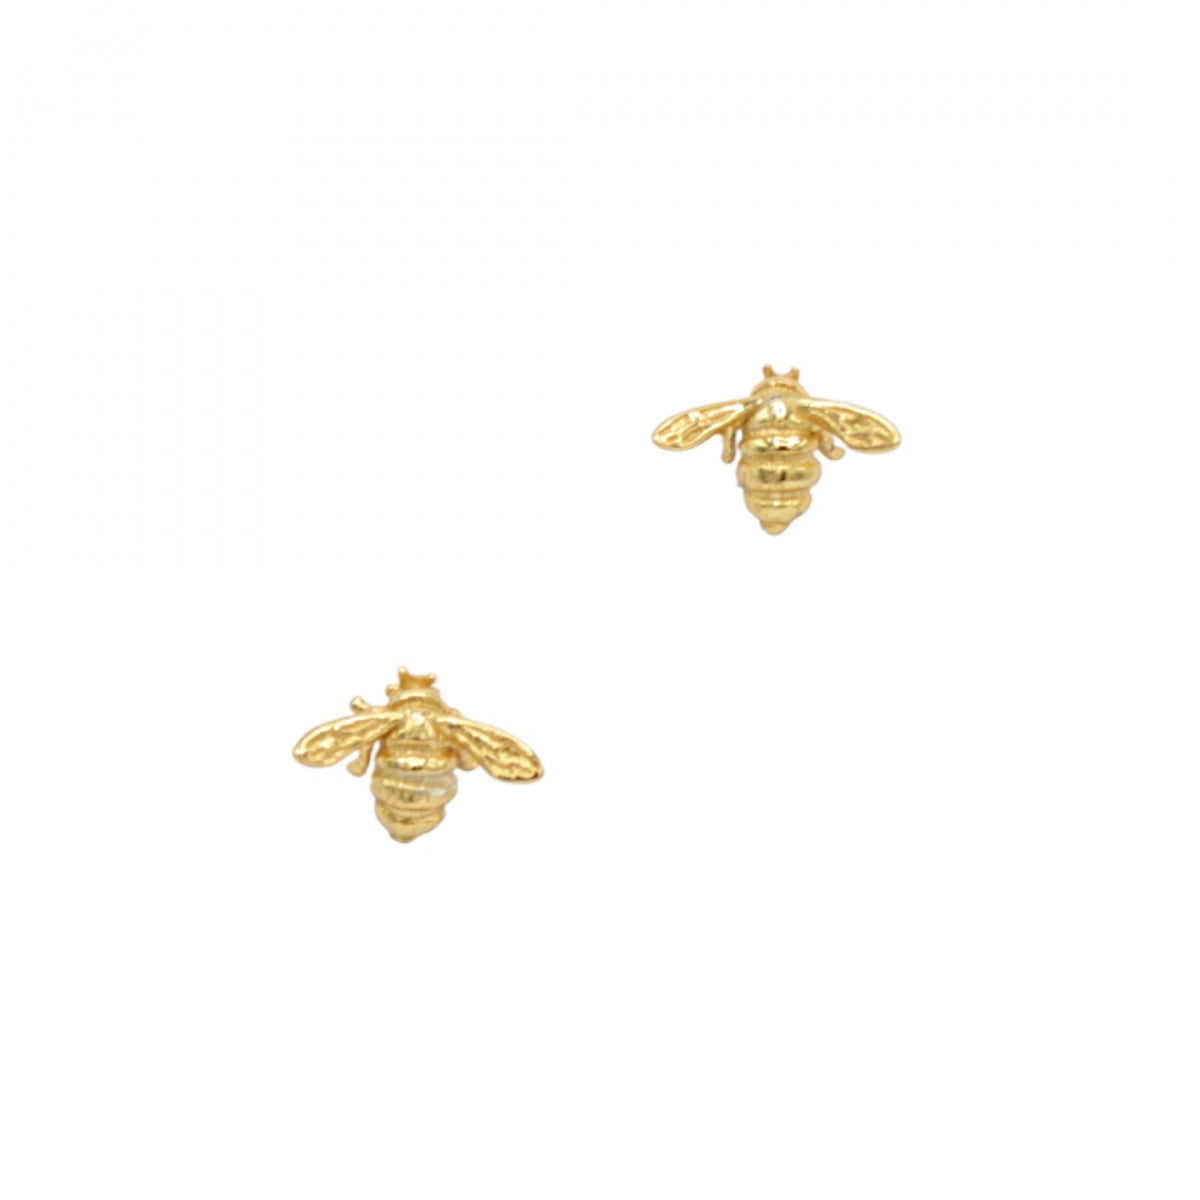 Bumble Bee Stud Earring - 925 Silver, Gold